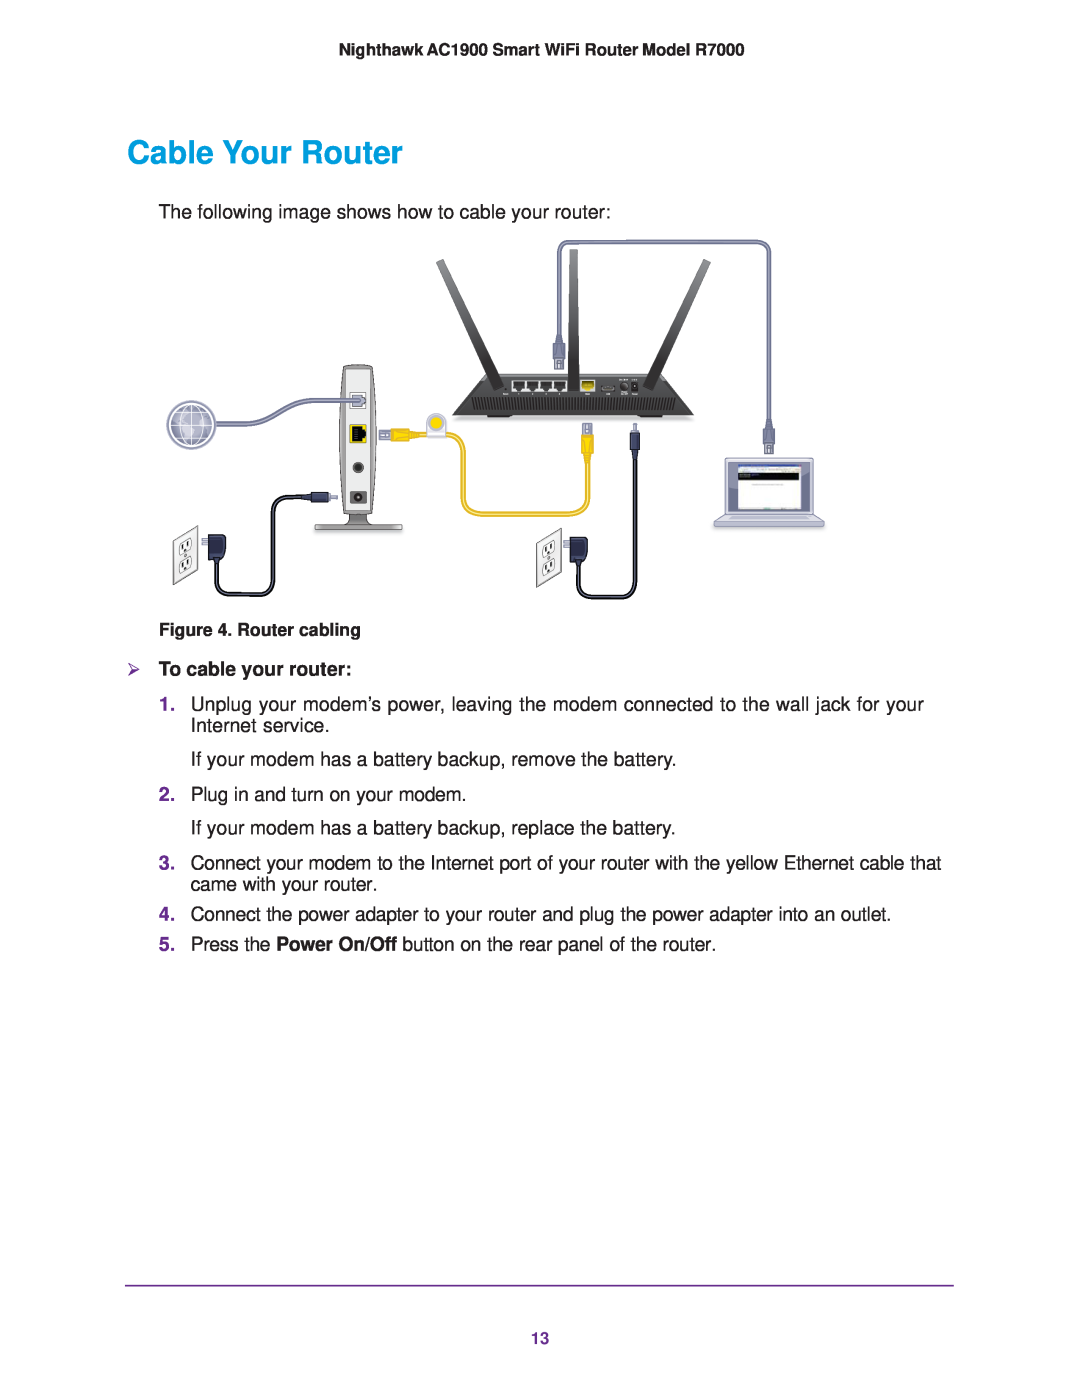 NETGEAR R7000 user manual Cable Your Router,  To cable your router 